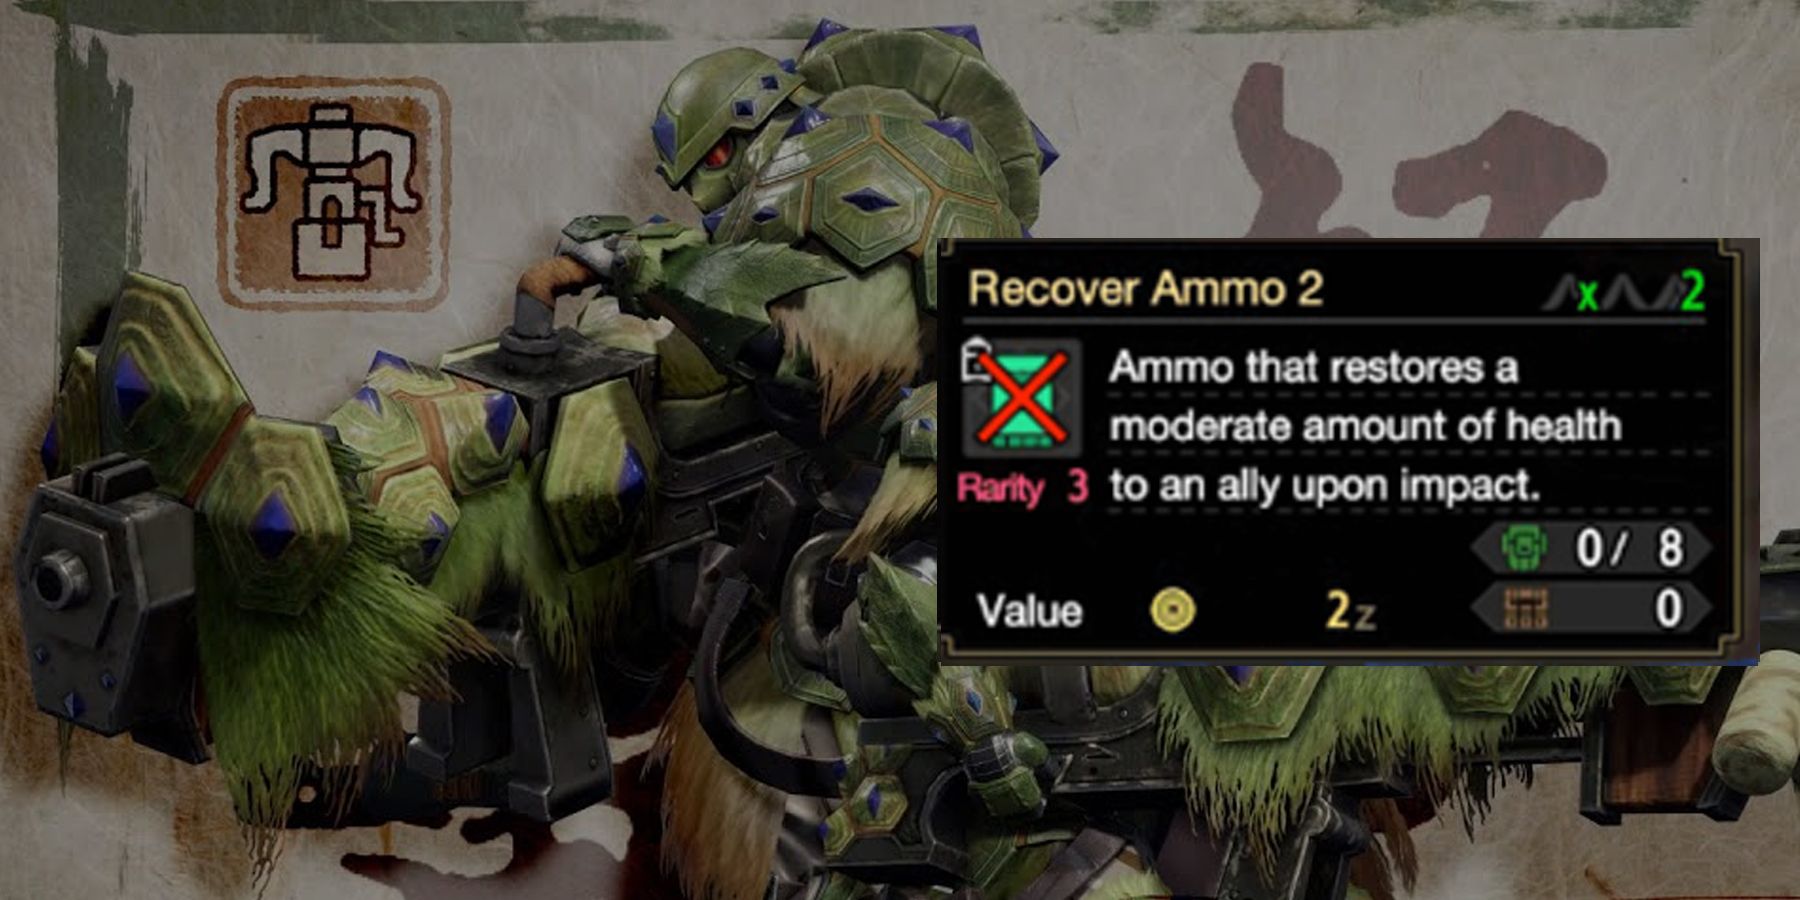 Recover Ammo 2